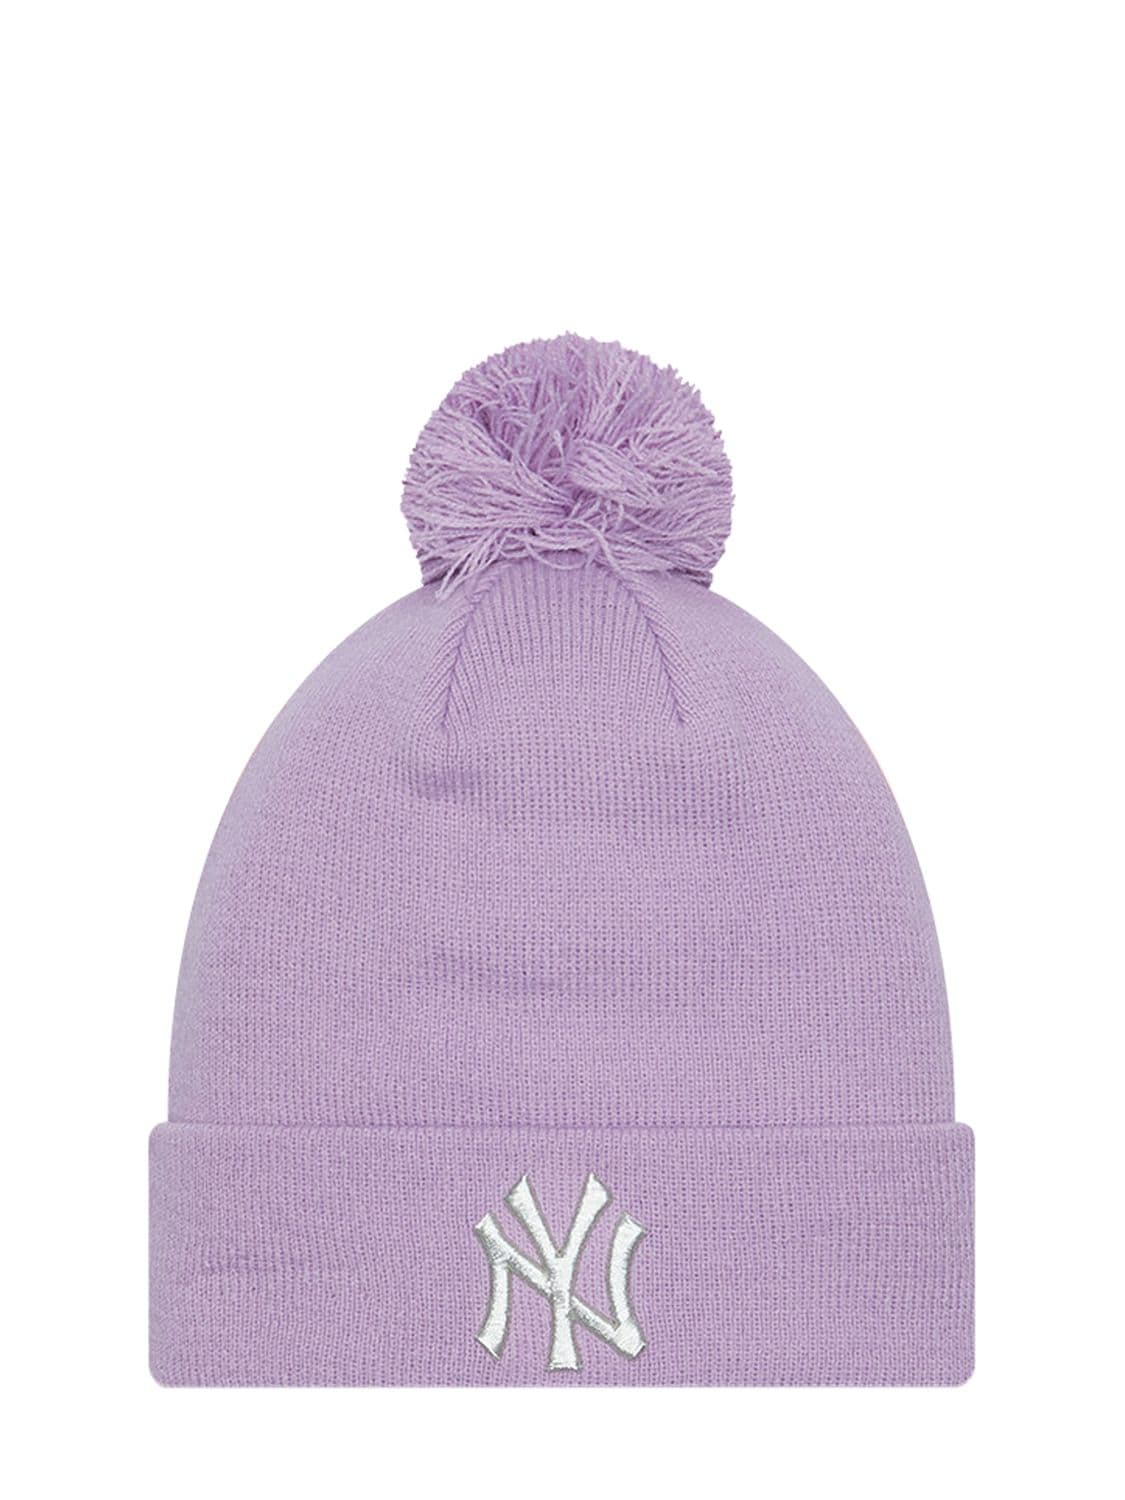 New Era Knit Ny Yankees Pompom Beanie In Pink,silver